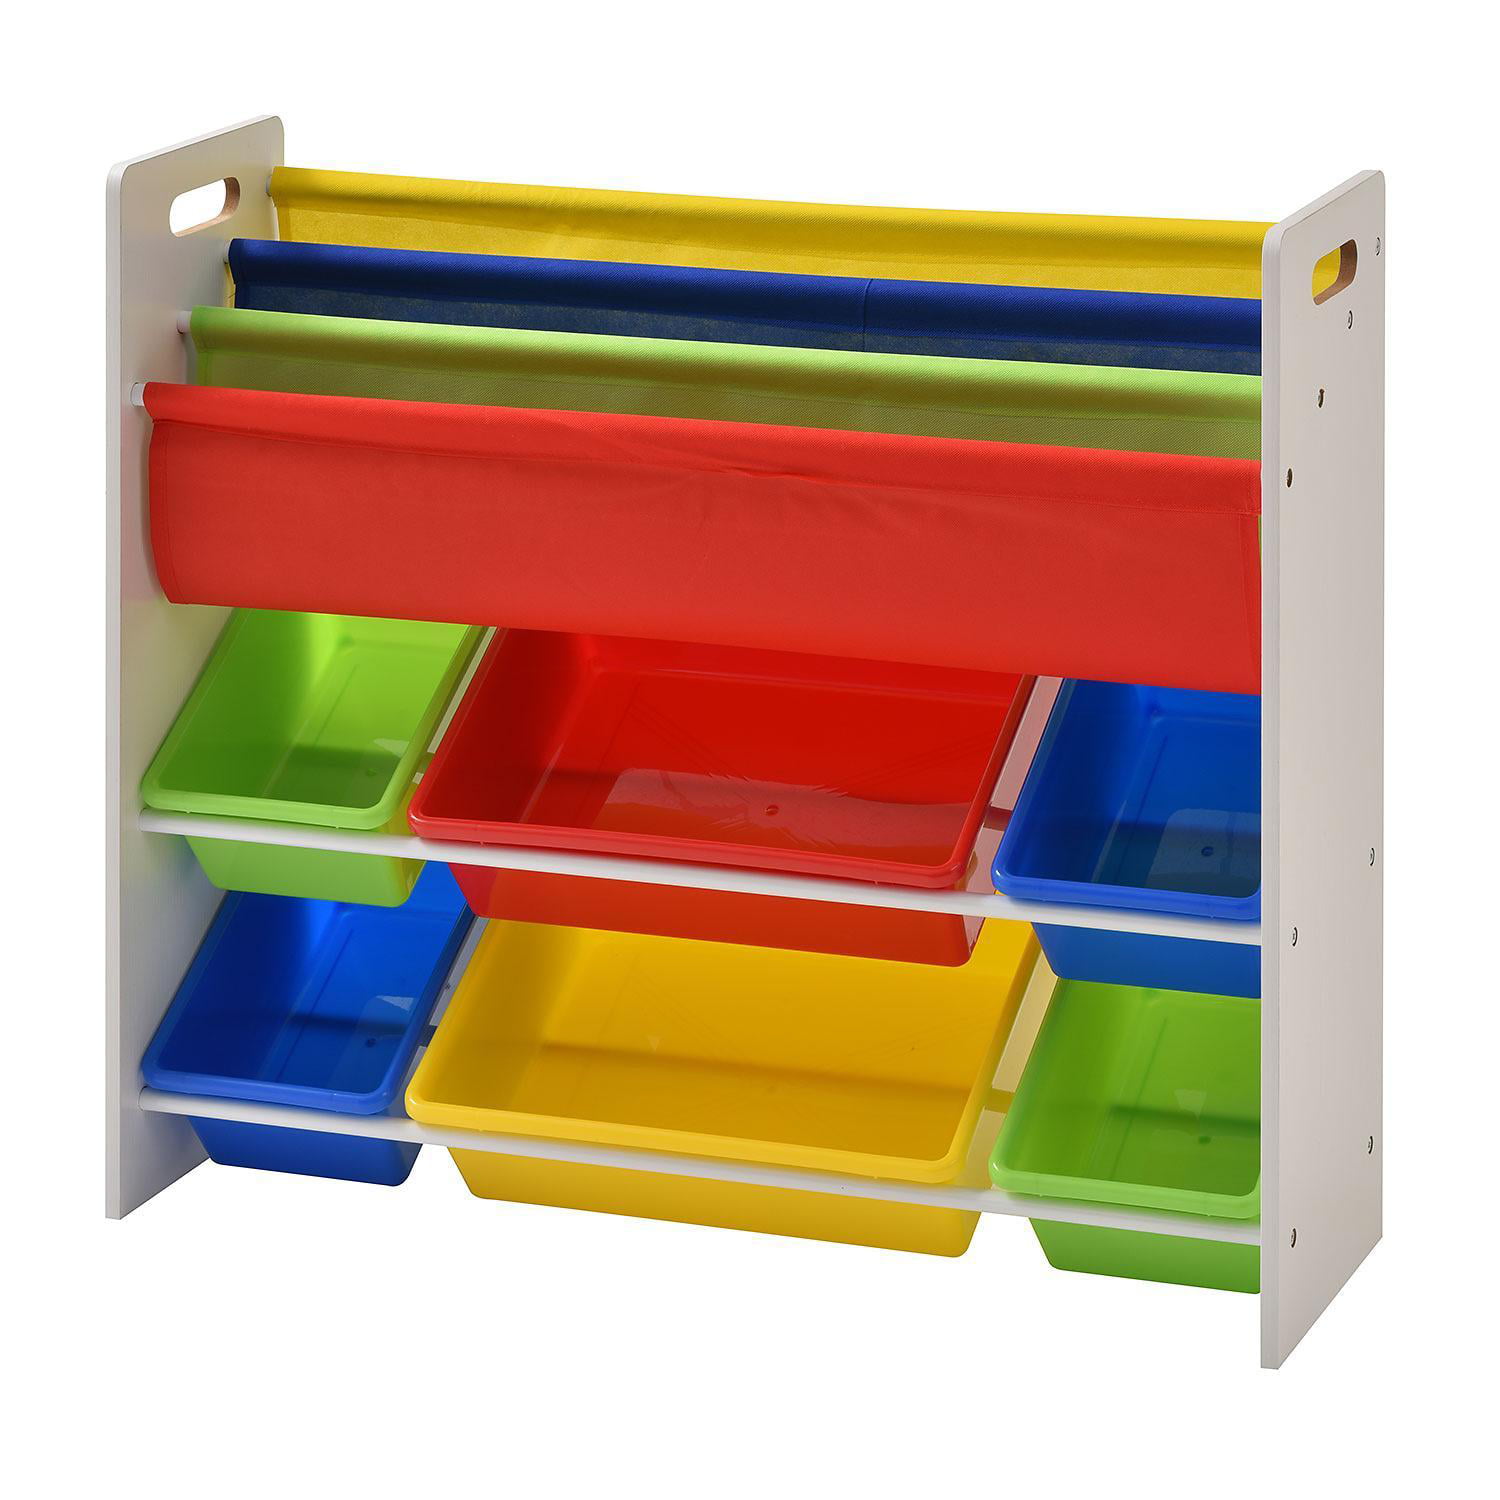 New Muscle Rack Book and Toy Organizer for Kids 